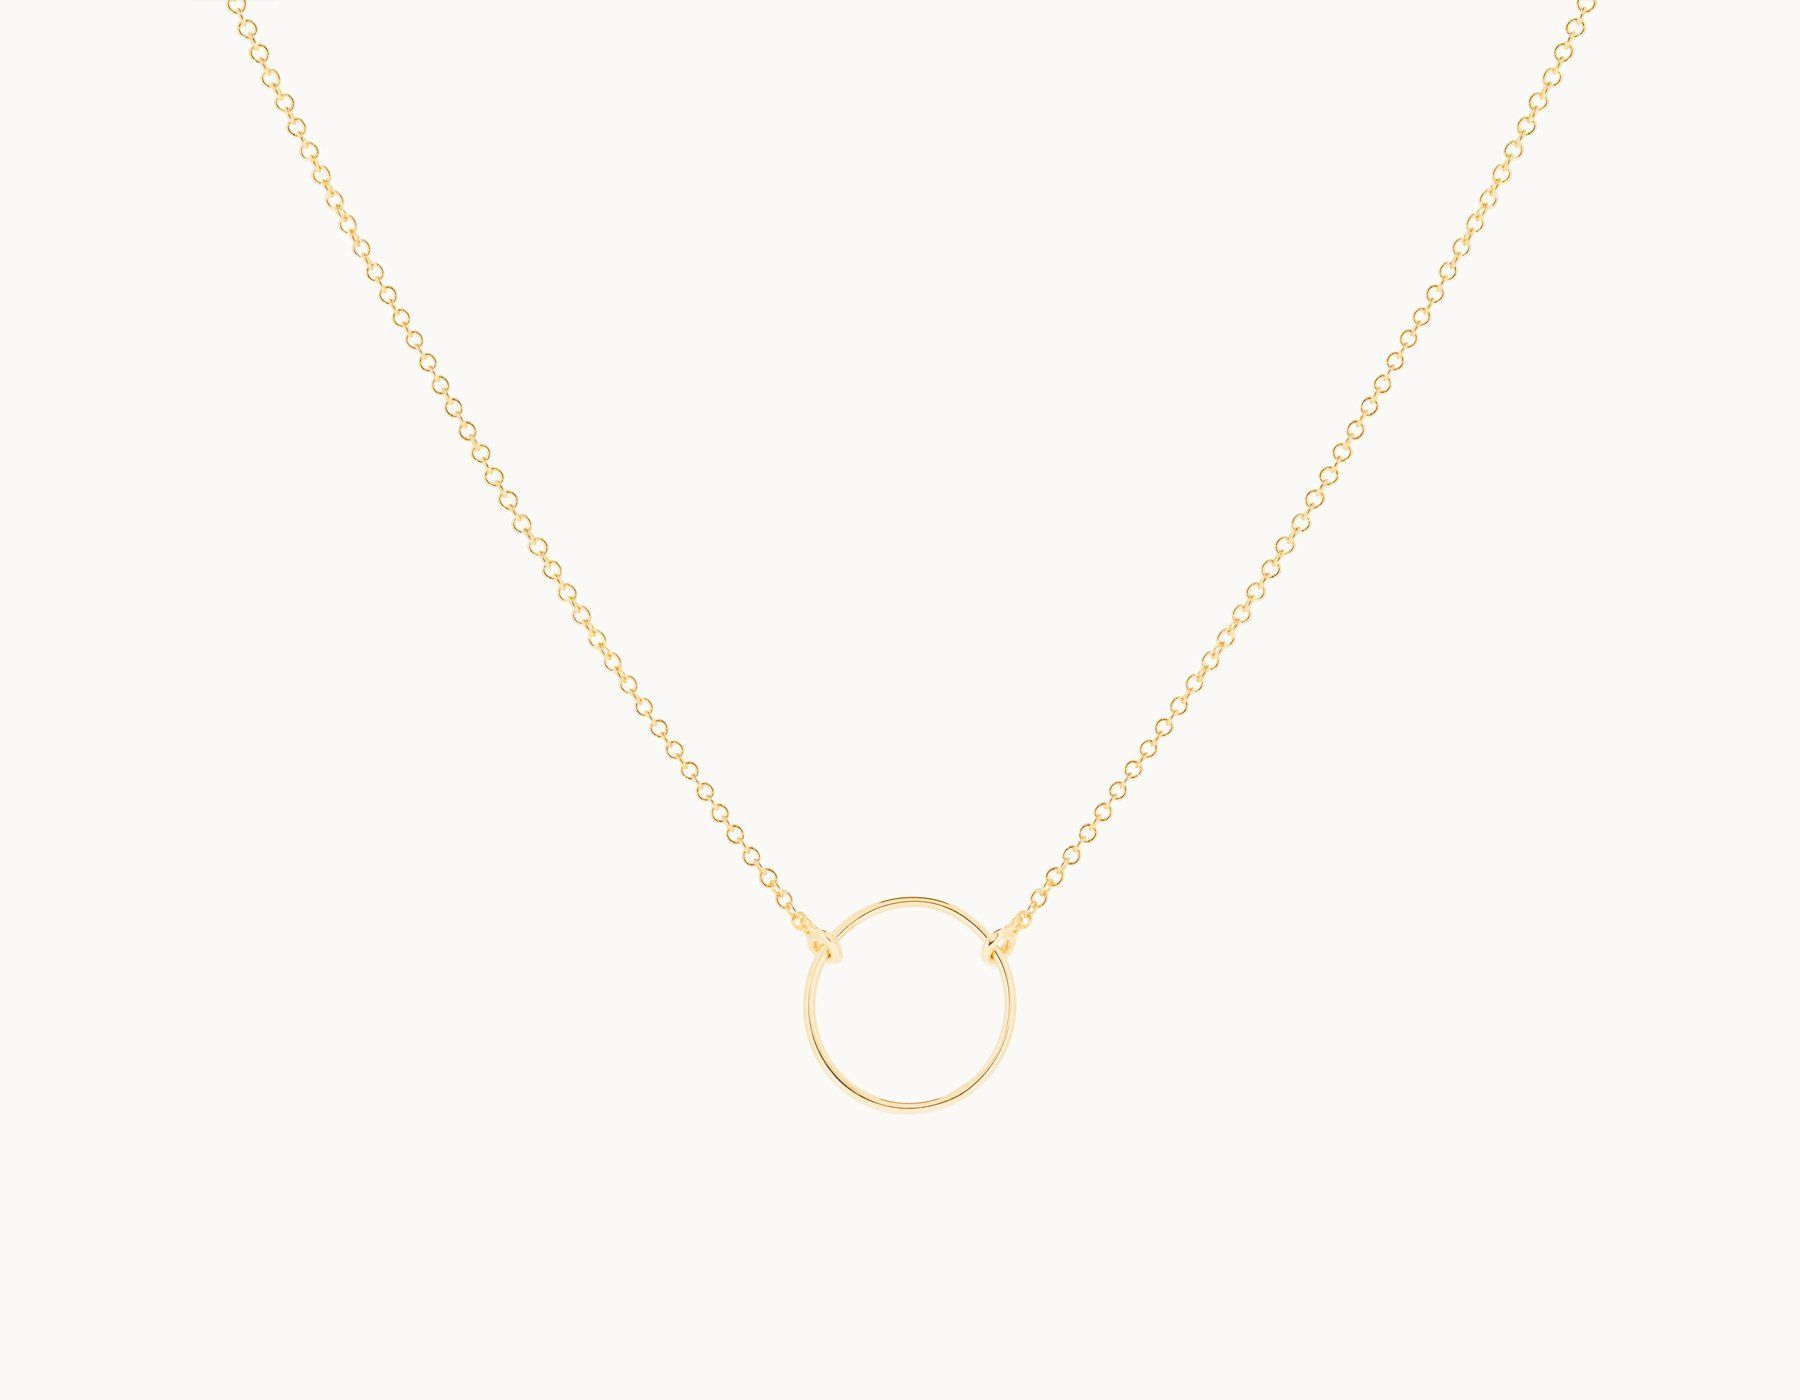 Circle Necklace | Ooh La La – My Style | Circle Necklace, Jewelry With Recent Circle Of Sparkle Necklaces (View 9 of 25)